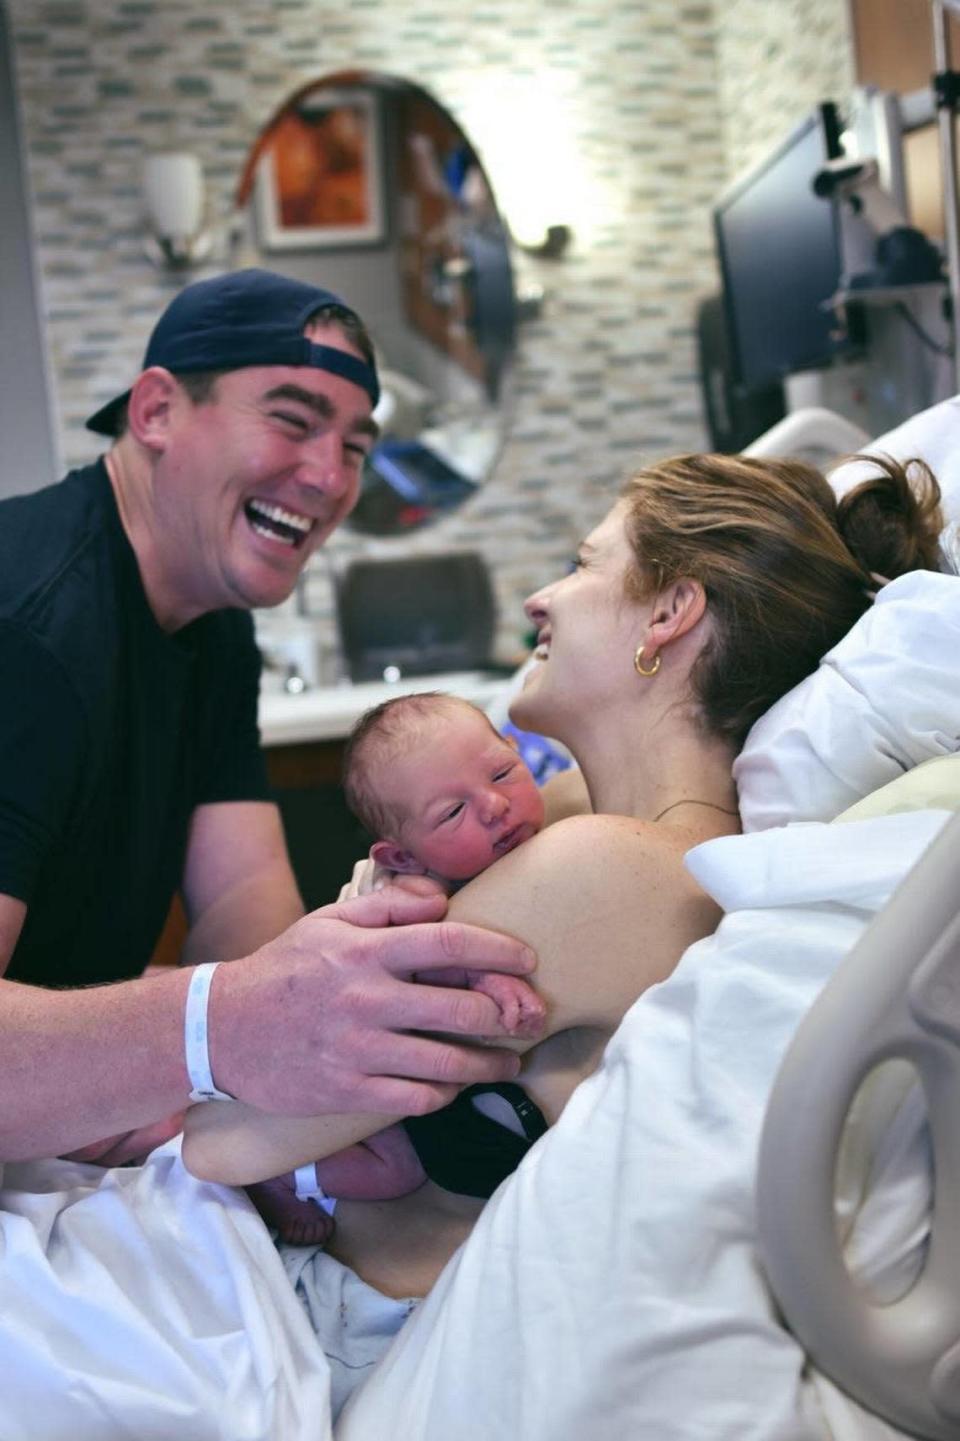 Tom and Rachael Sullivan of Raleigh welcomed their newborn baby Sutton on July 25 after struggling with fertility issues and gaining popularity during their pregnancy journey.